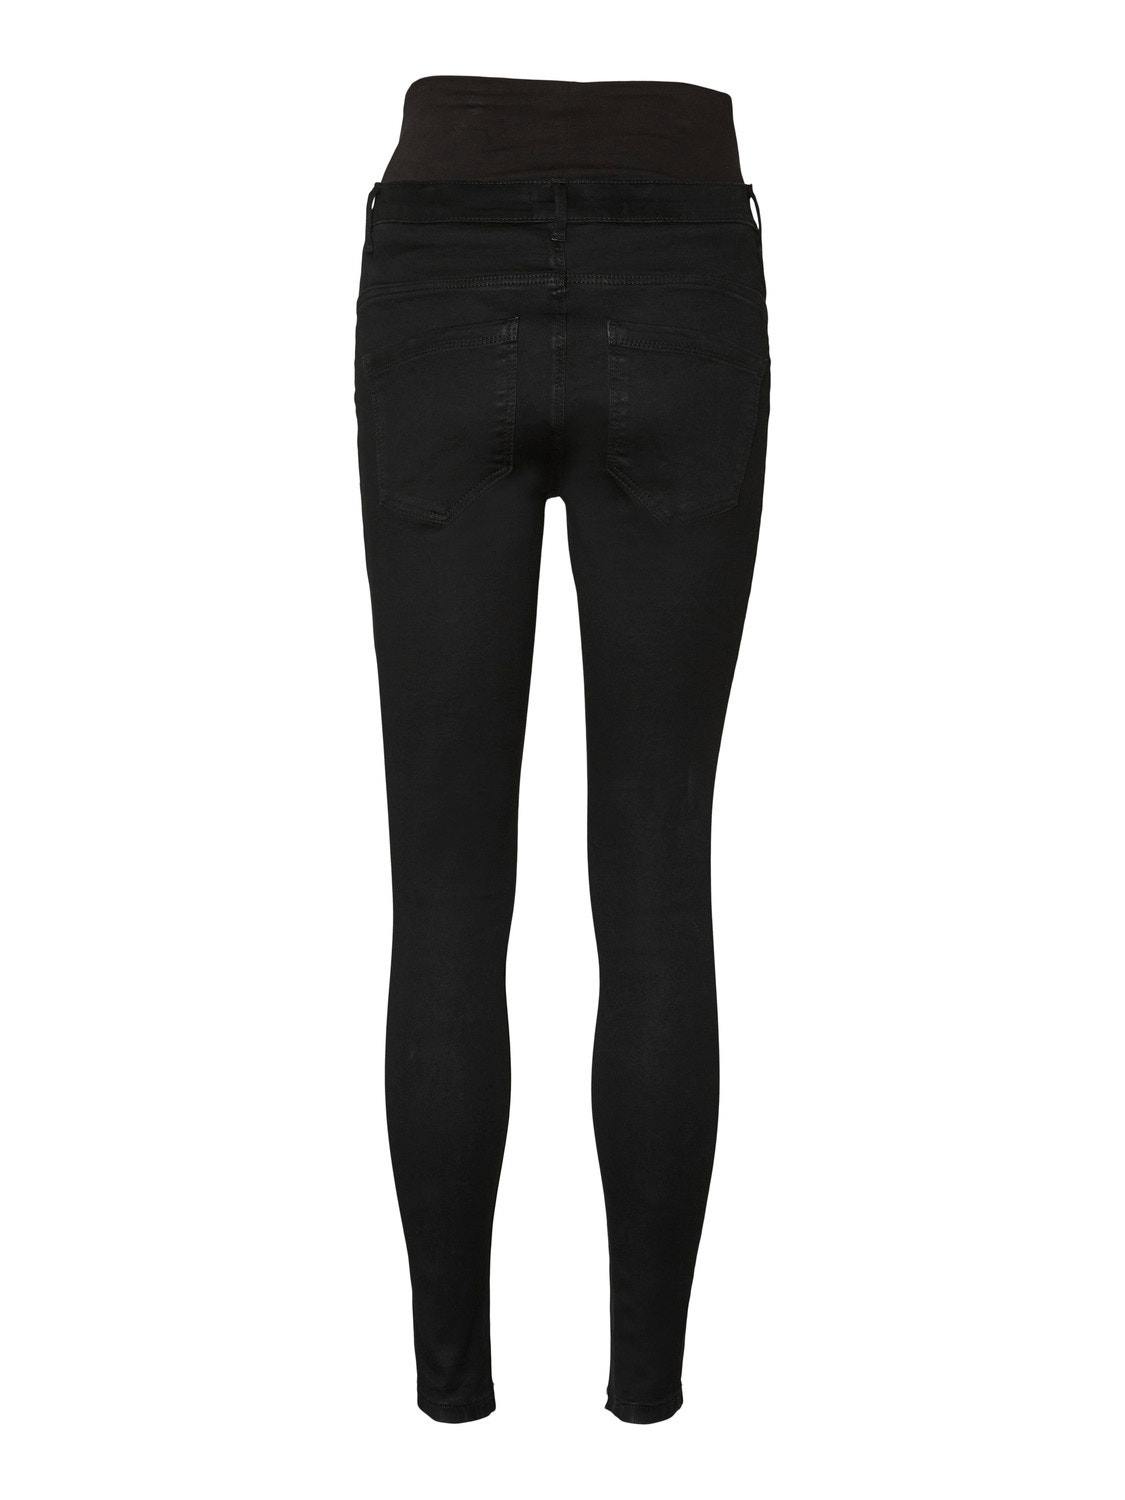 MAMA.LICIOUS Jeans Skinny Fit -Black - 20015413